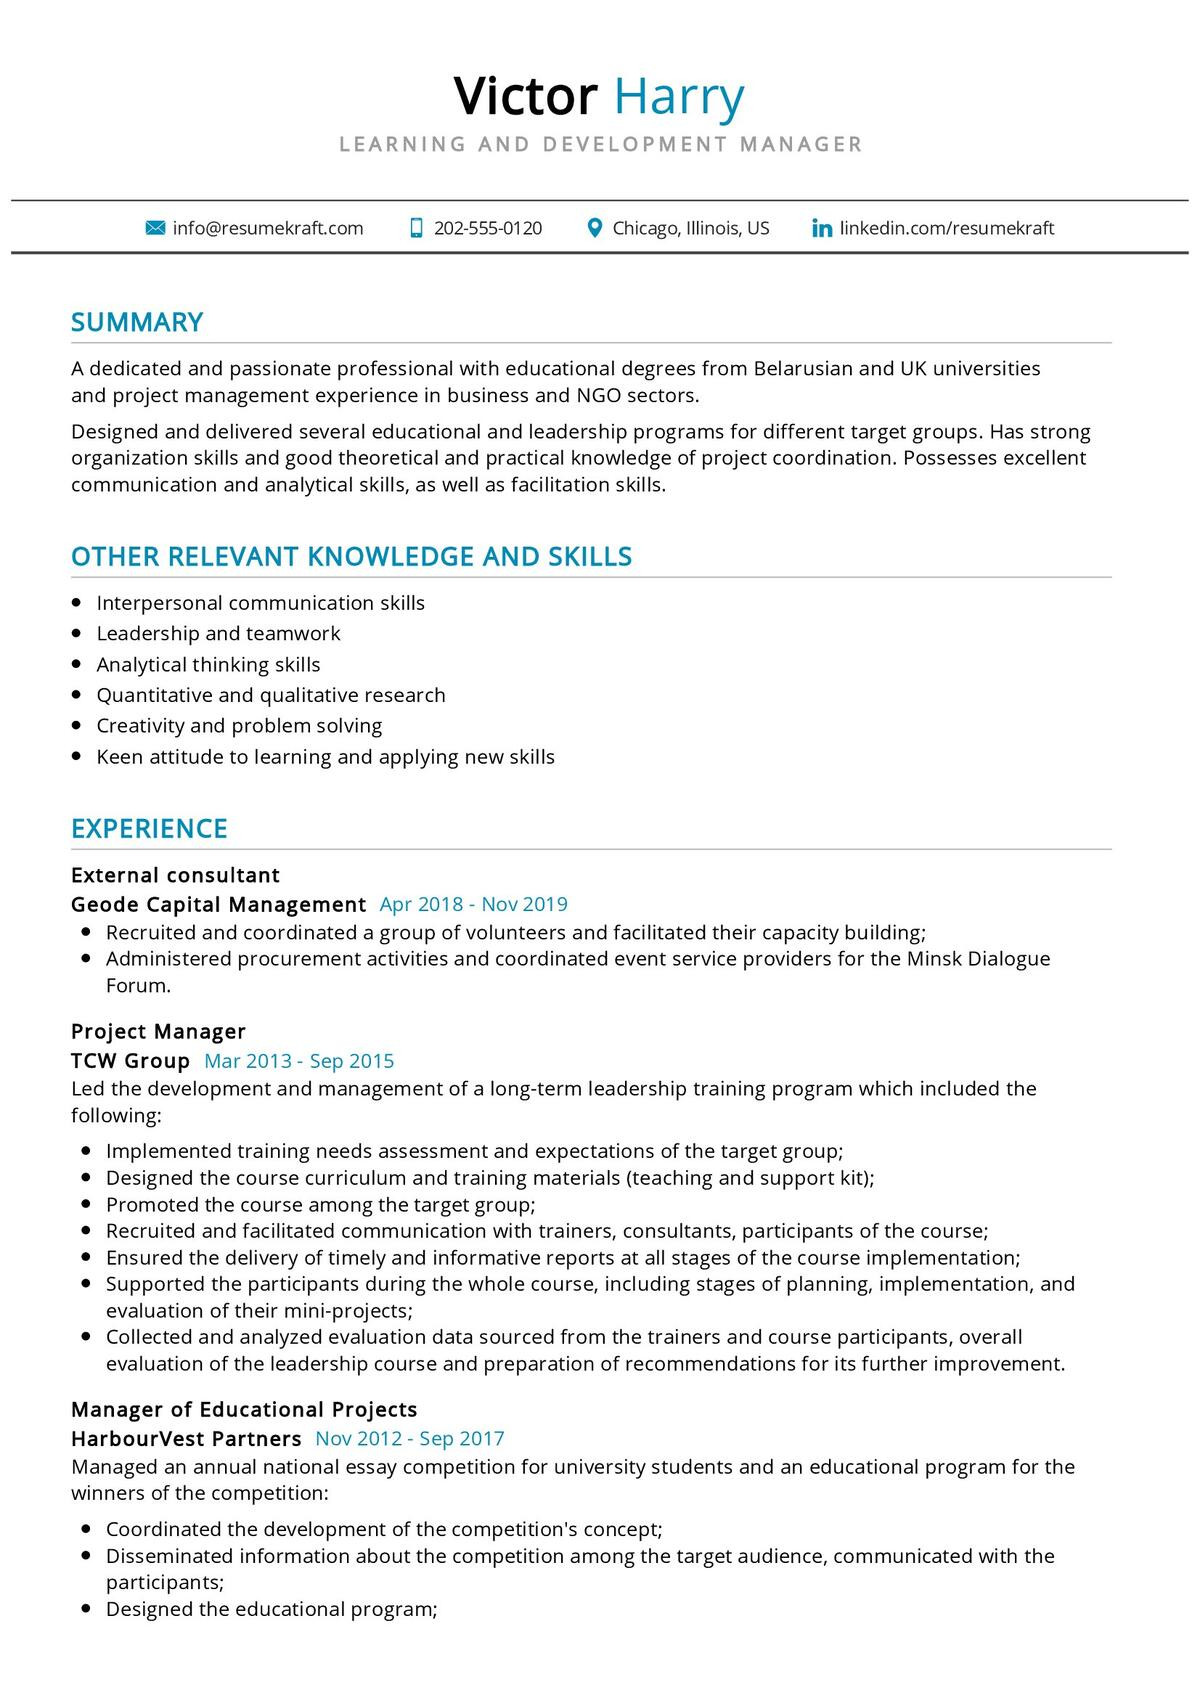 Sample Resume for A Program and Training Manager Learning and Development Manager Resume 2021 Writing Guide …